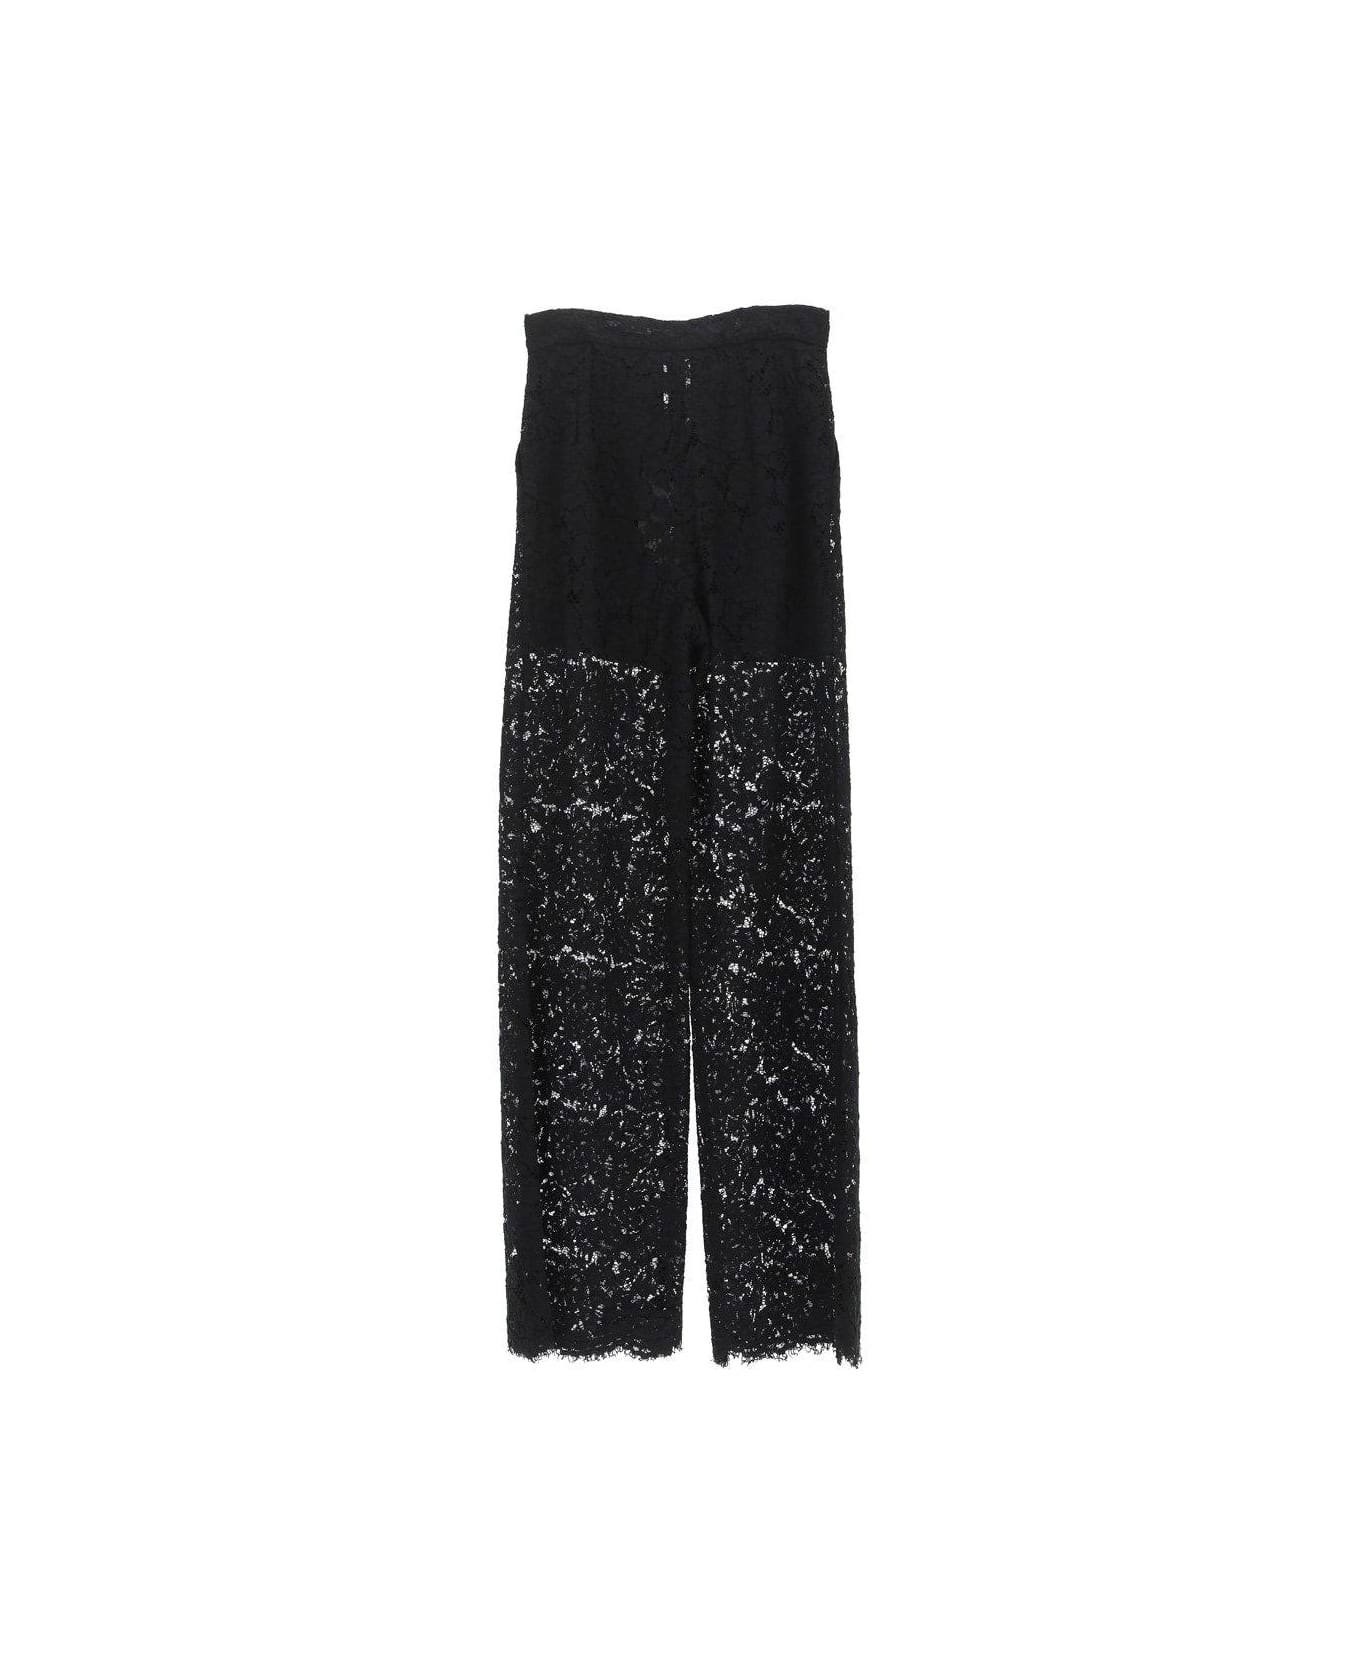 Dolce & Gabbana Flared Branded Stretch Lace Pants - Nero